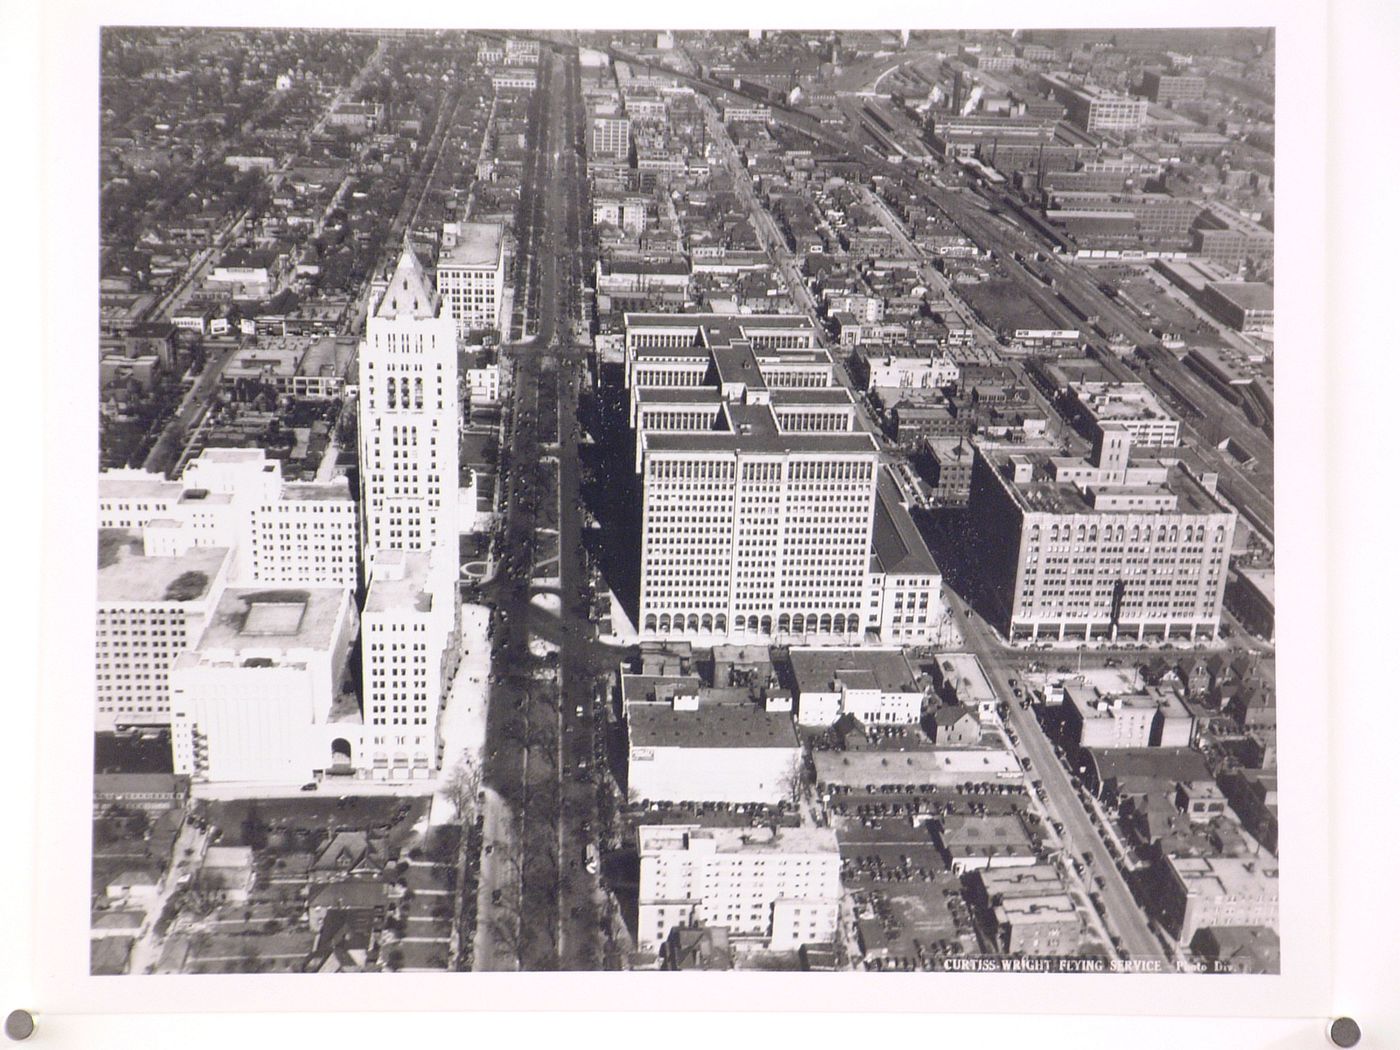 Aerial view of Detroit showing the Fisher Building on the left and the General Motors Building in the centre, West Grand Boulevard, Detroit, Michigan